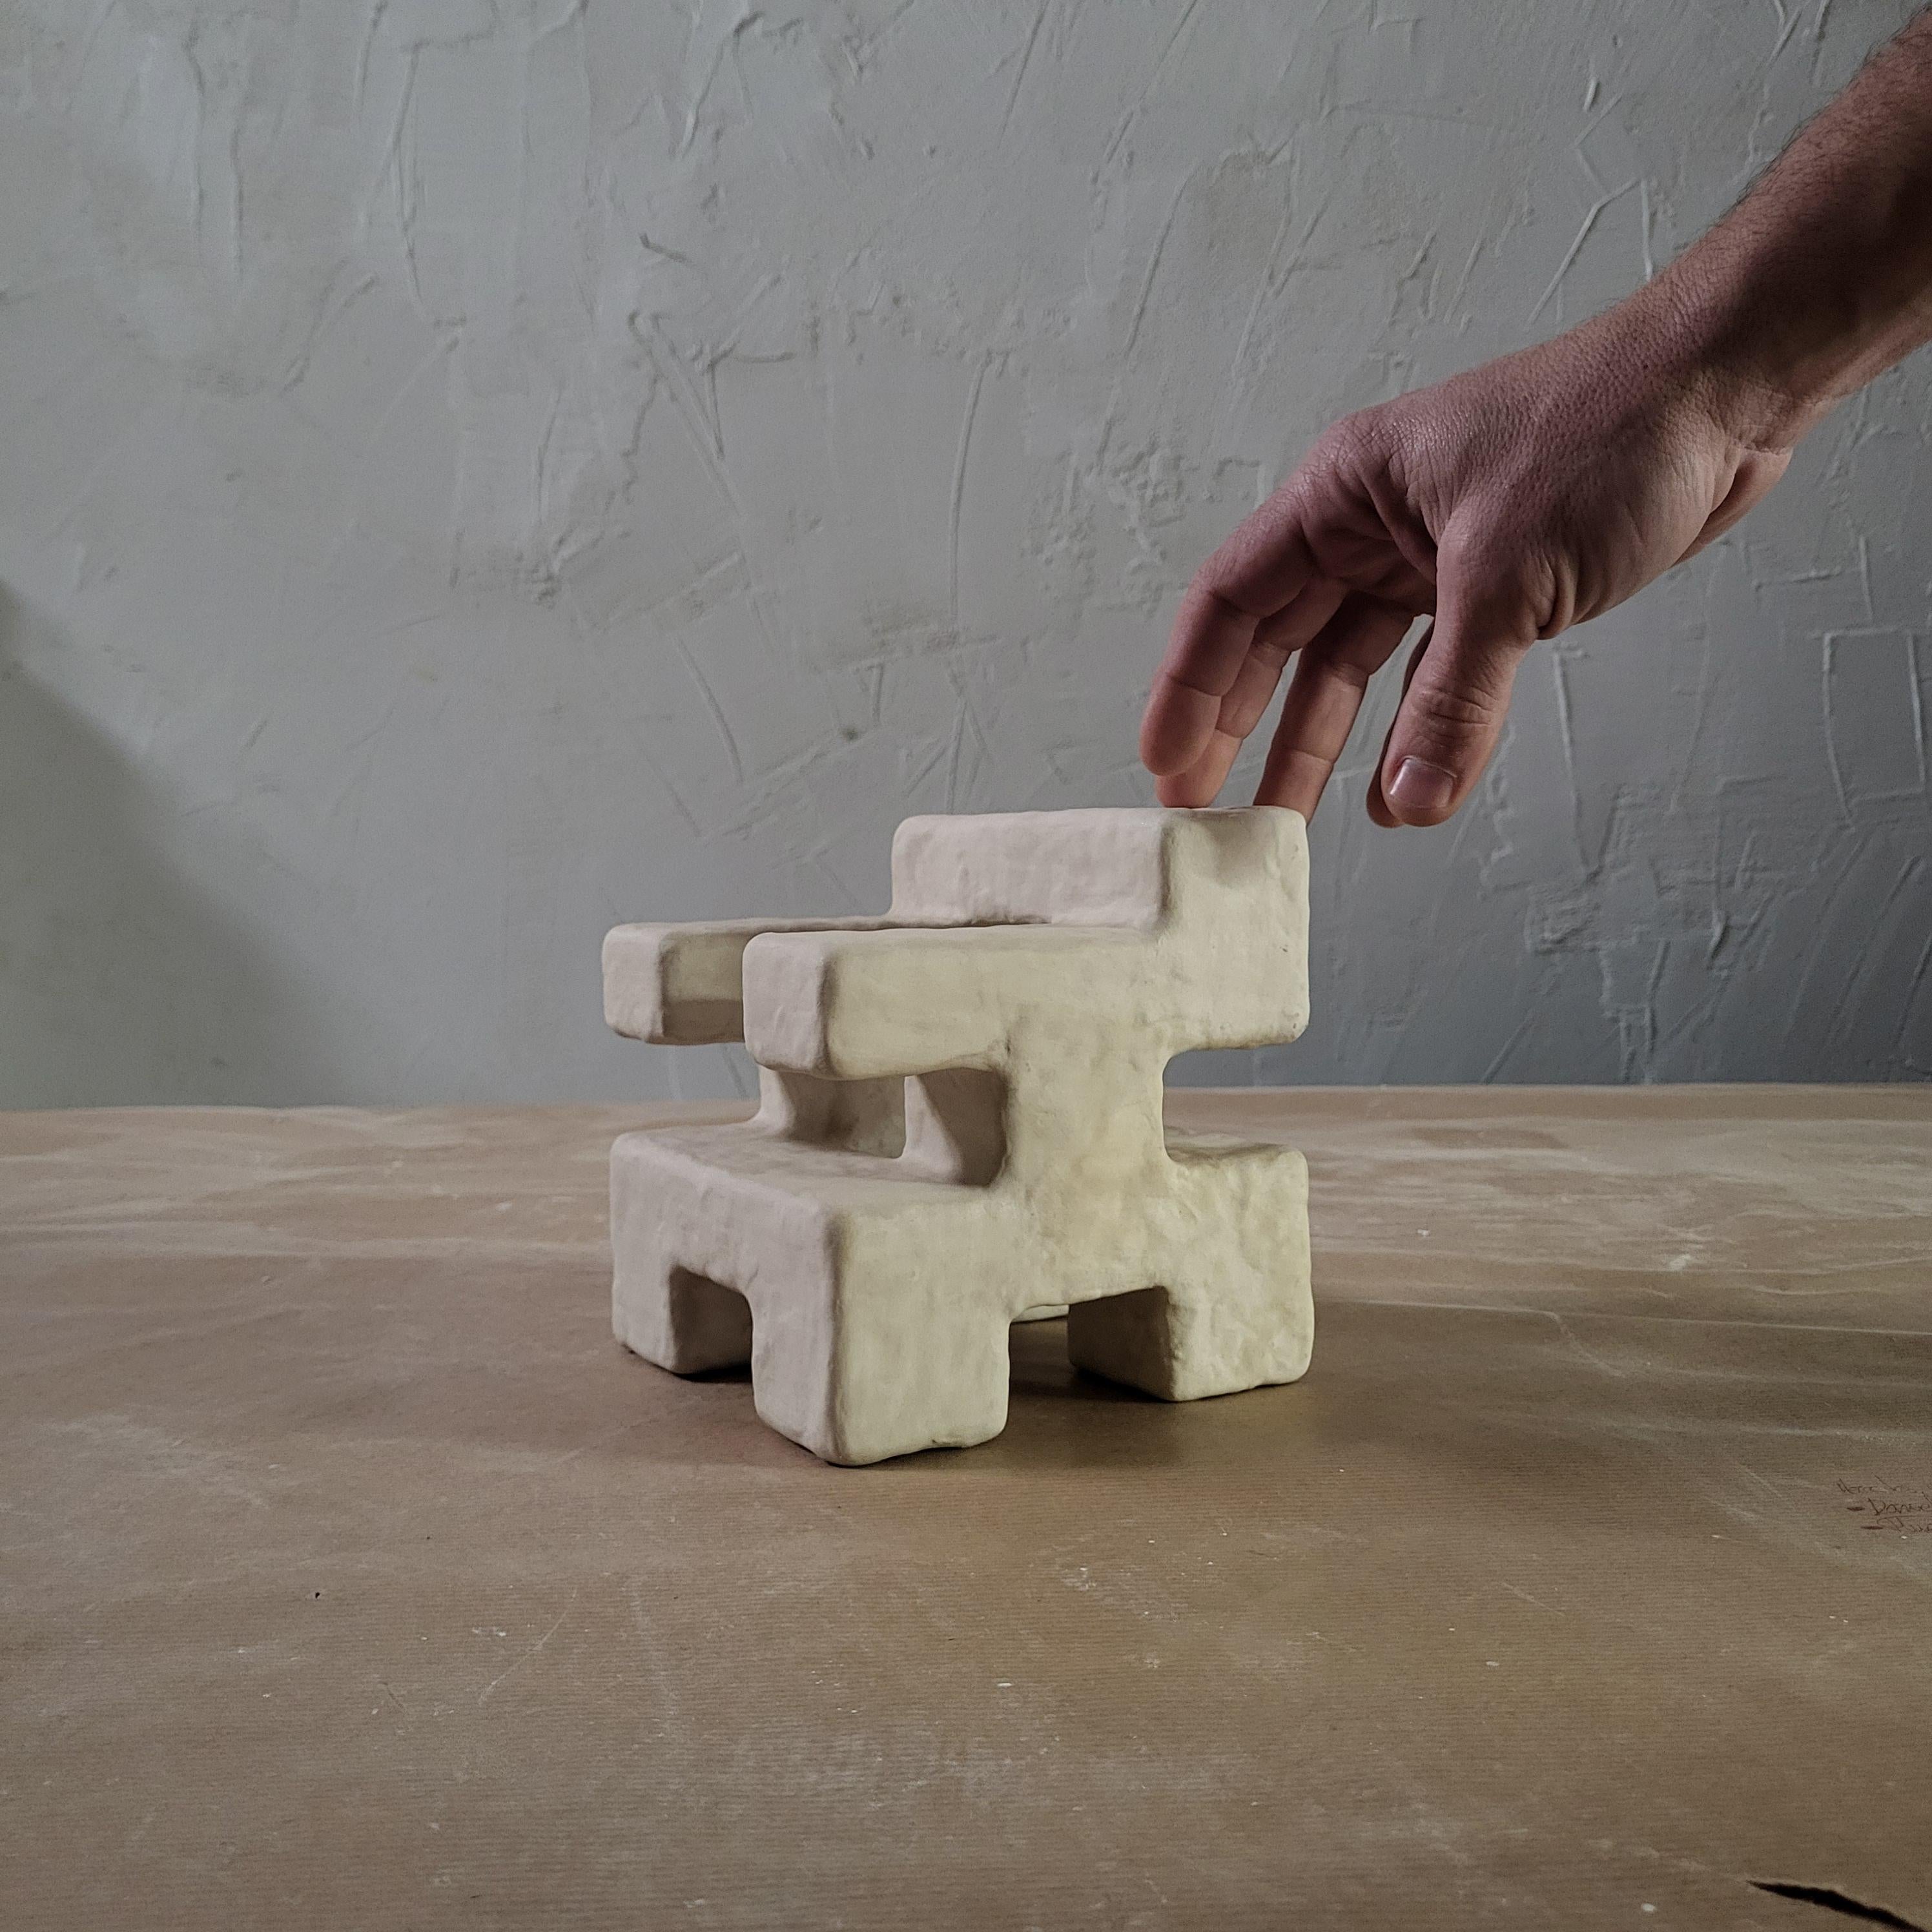 Hypercube III

We discovered organic plaster stucco when we arrived at our workshop in Seville. Artisans dedicated to the world of Holy Week in Seville work in the same space and the 